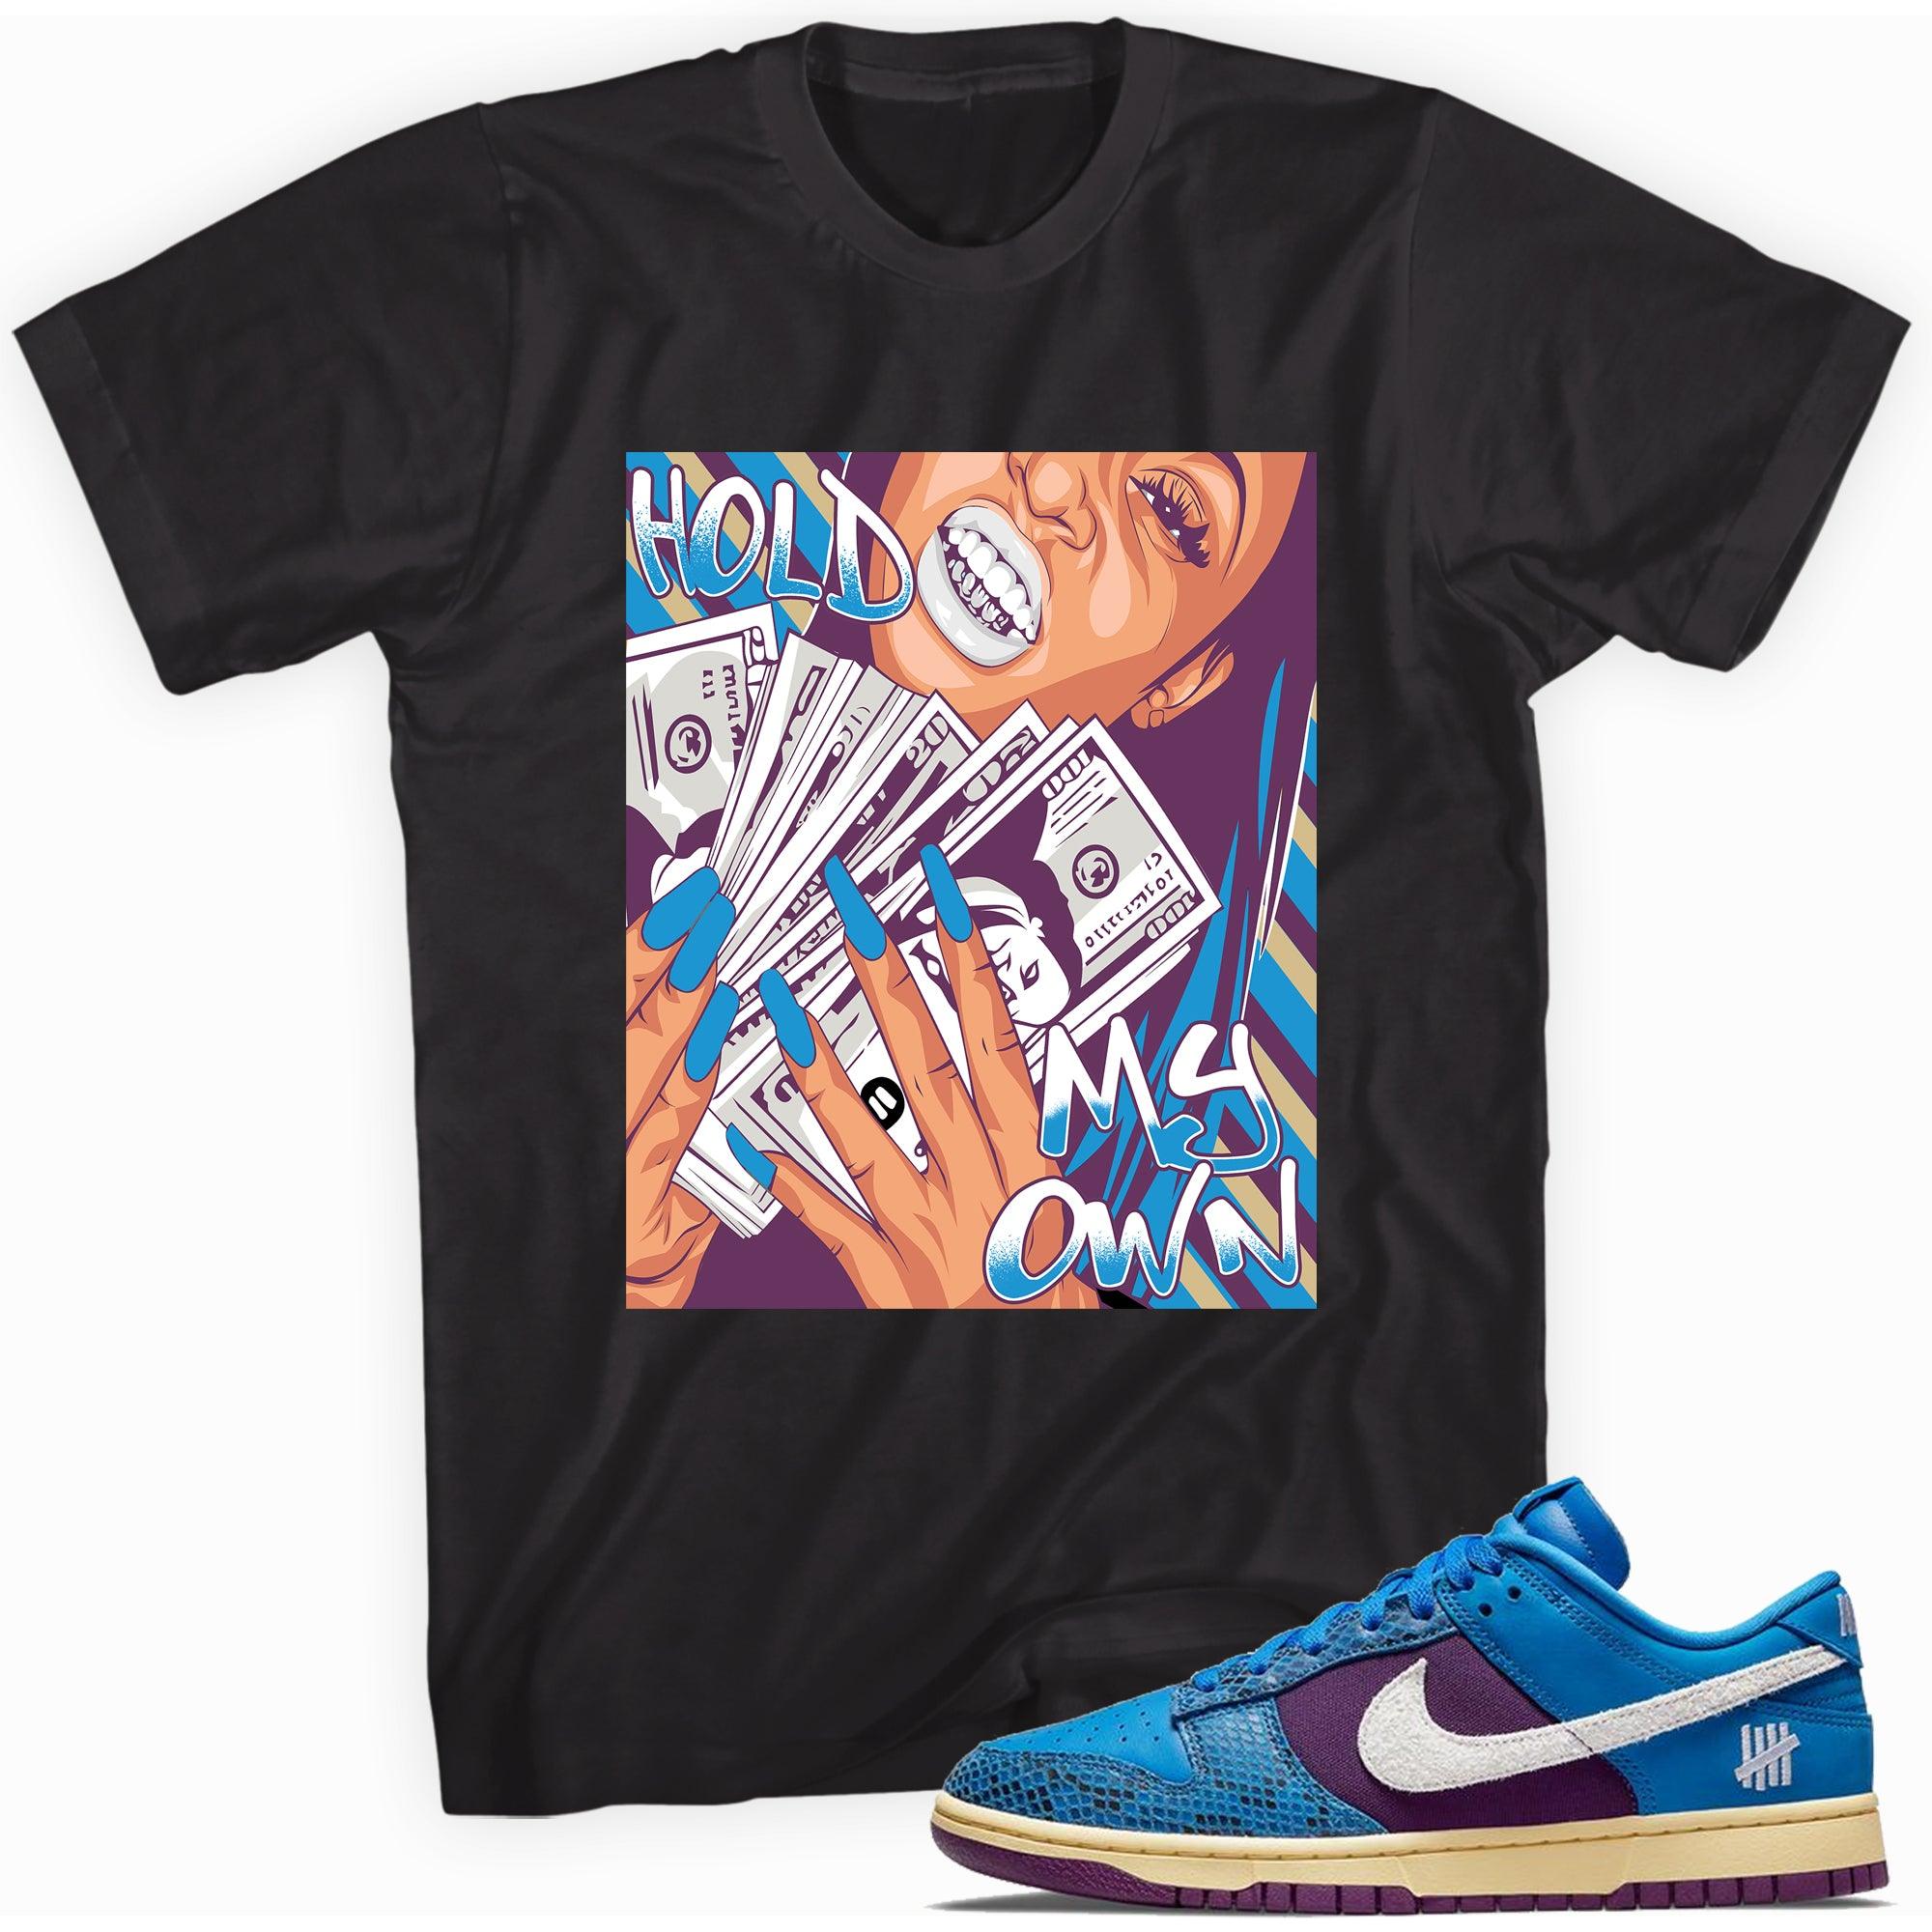 Hold My Own Shirt Nike Dunk Low Undefeated 5 On It Dunk vs AF1 photo